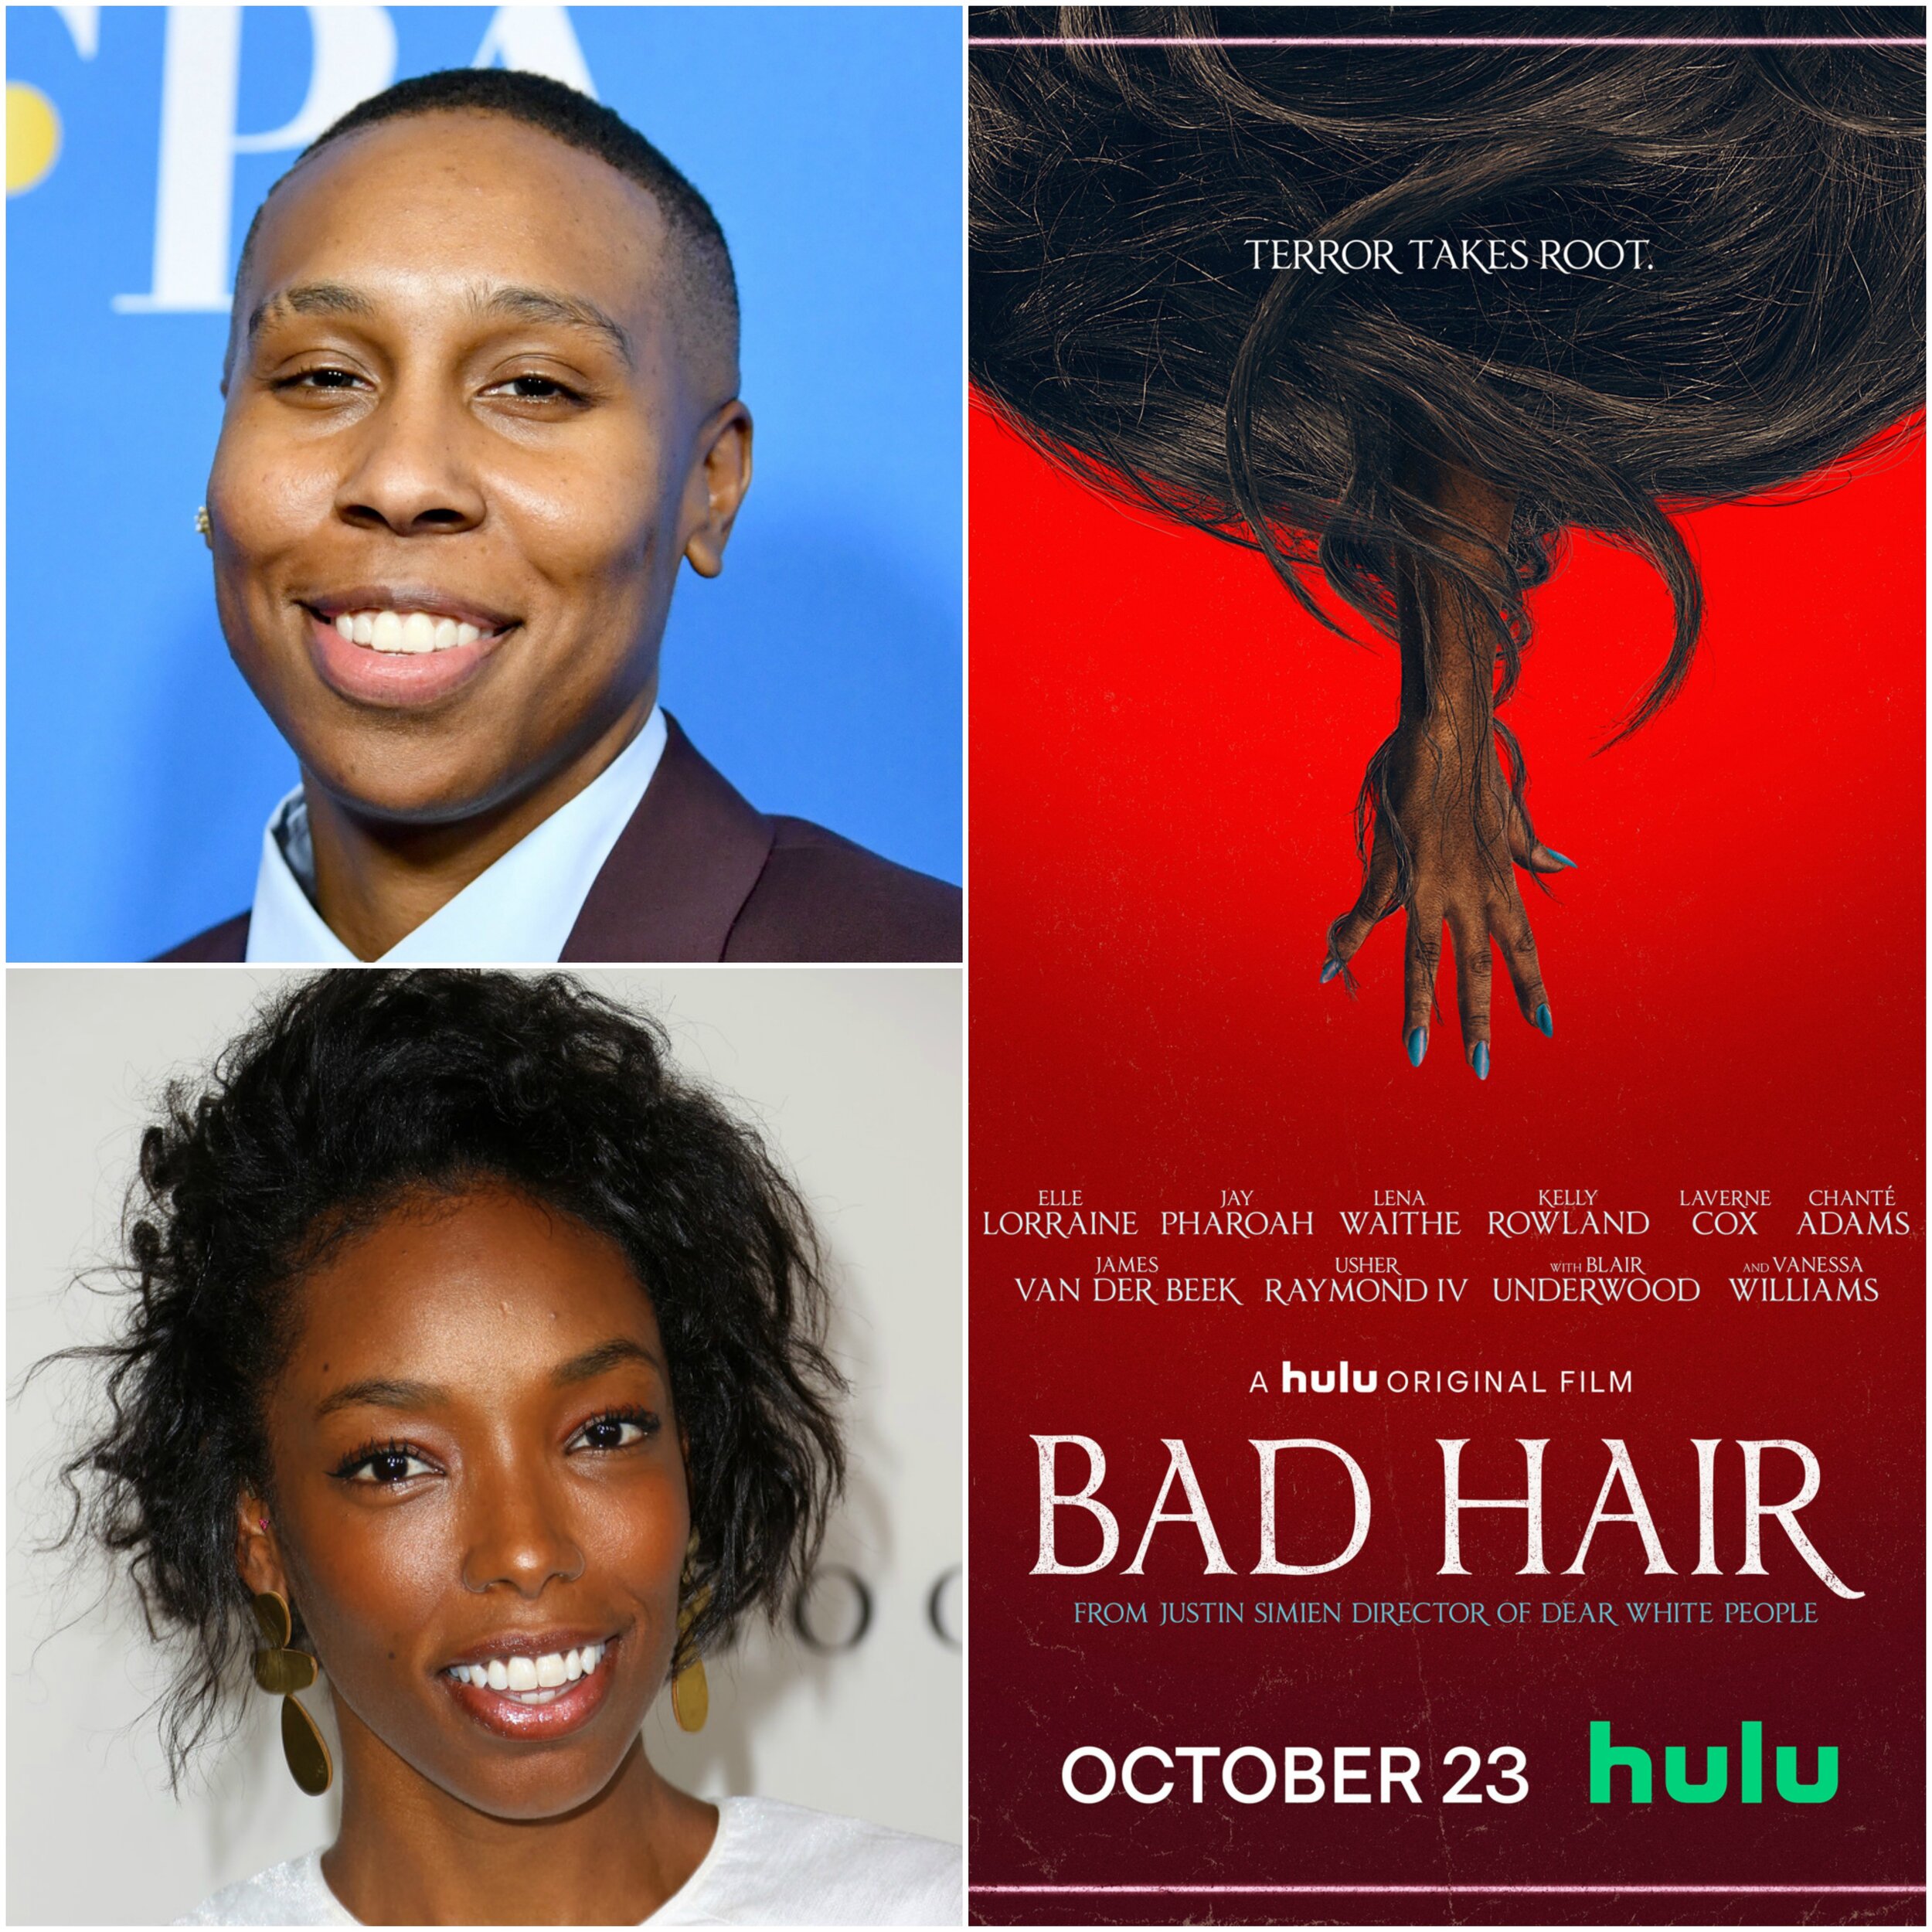 BAD HAIR 2020  Trailer Featurette Images and Posters  Bad hair  Comedy writing New movie posters